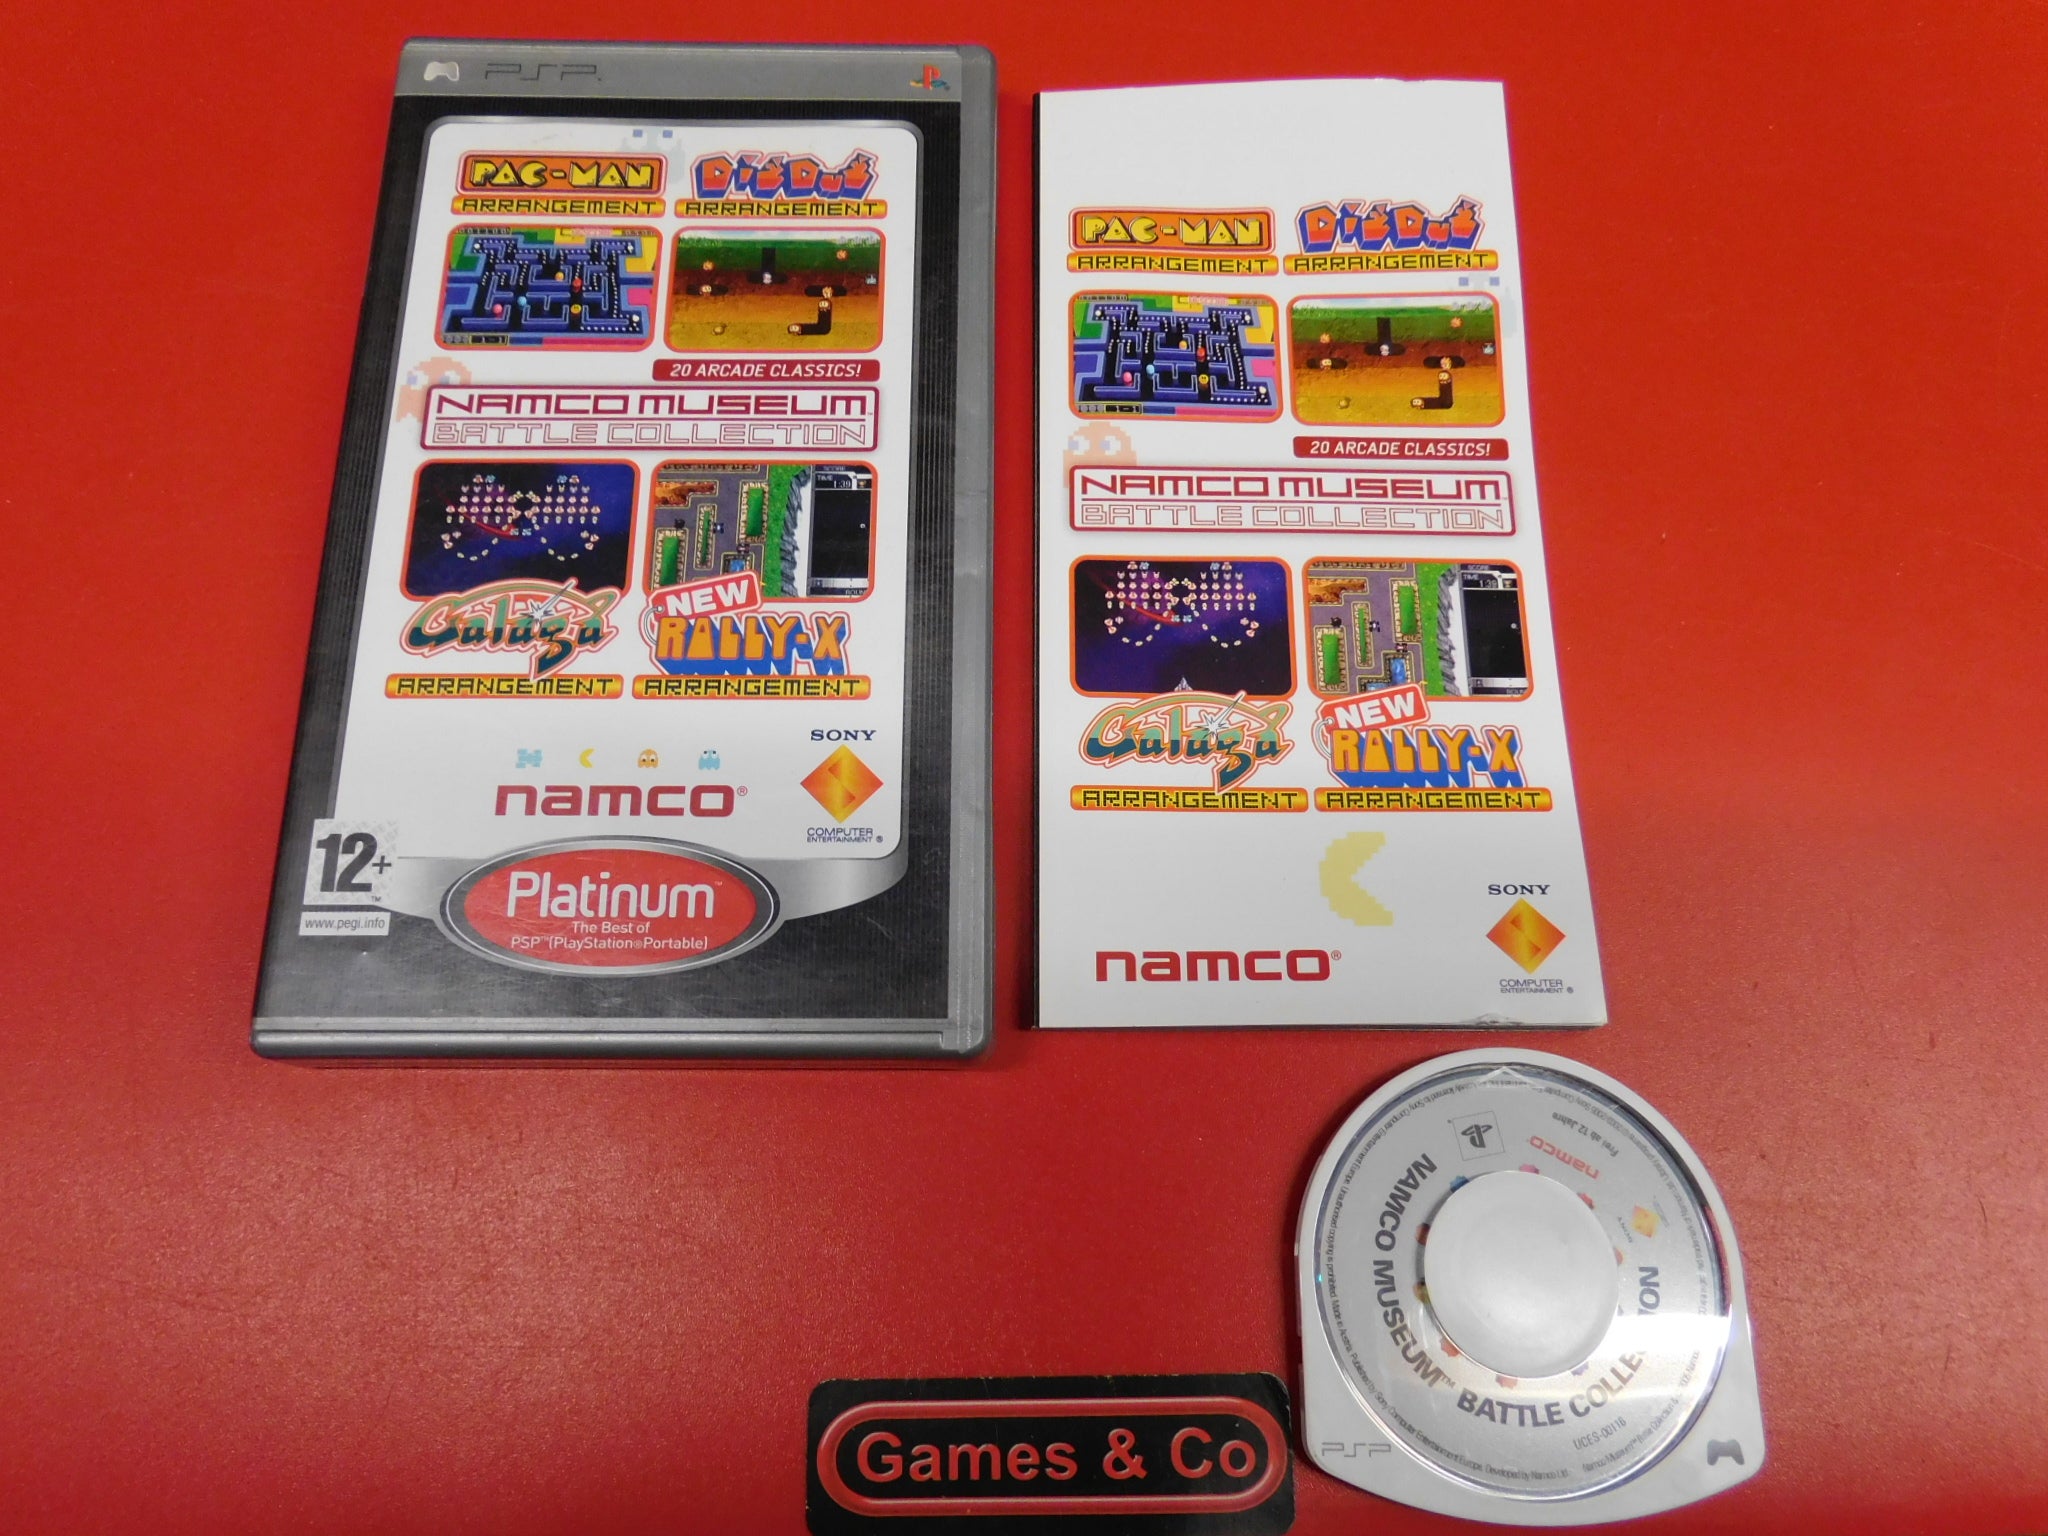 NAMCO MUSEUM BATTLE COLLECTION